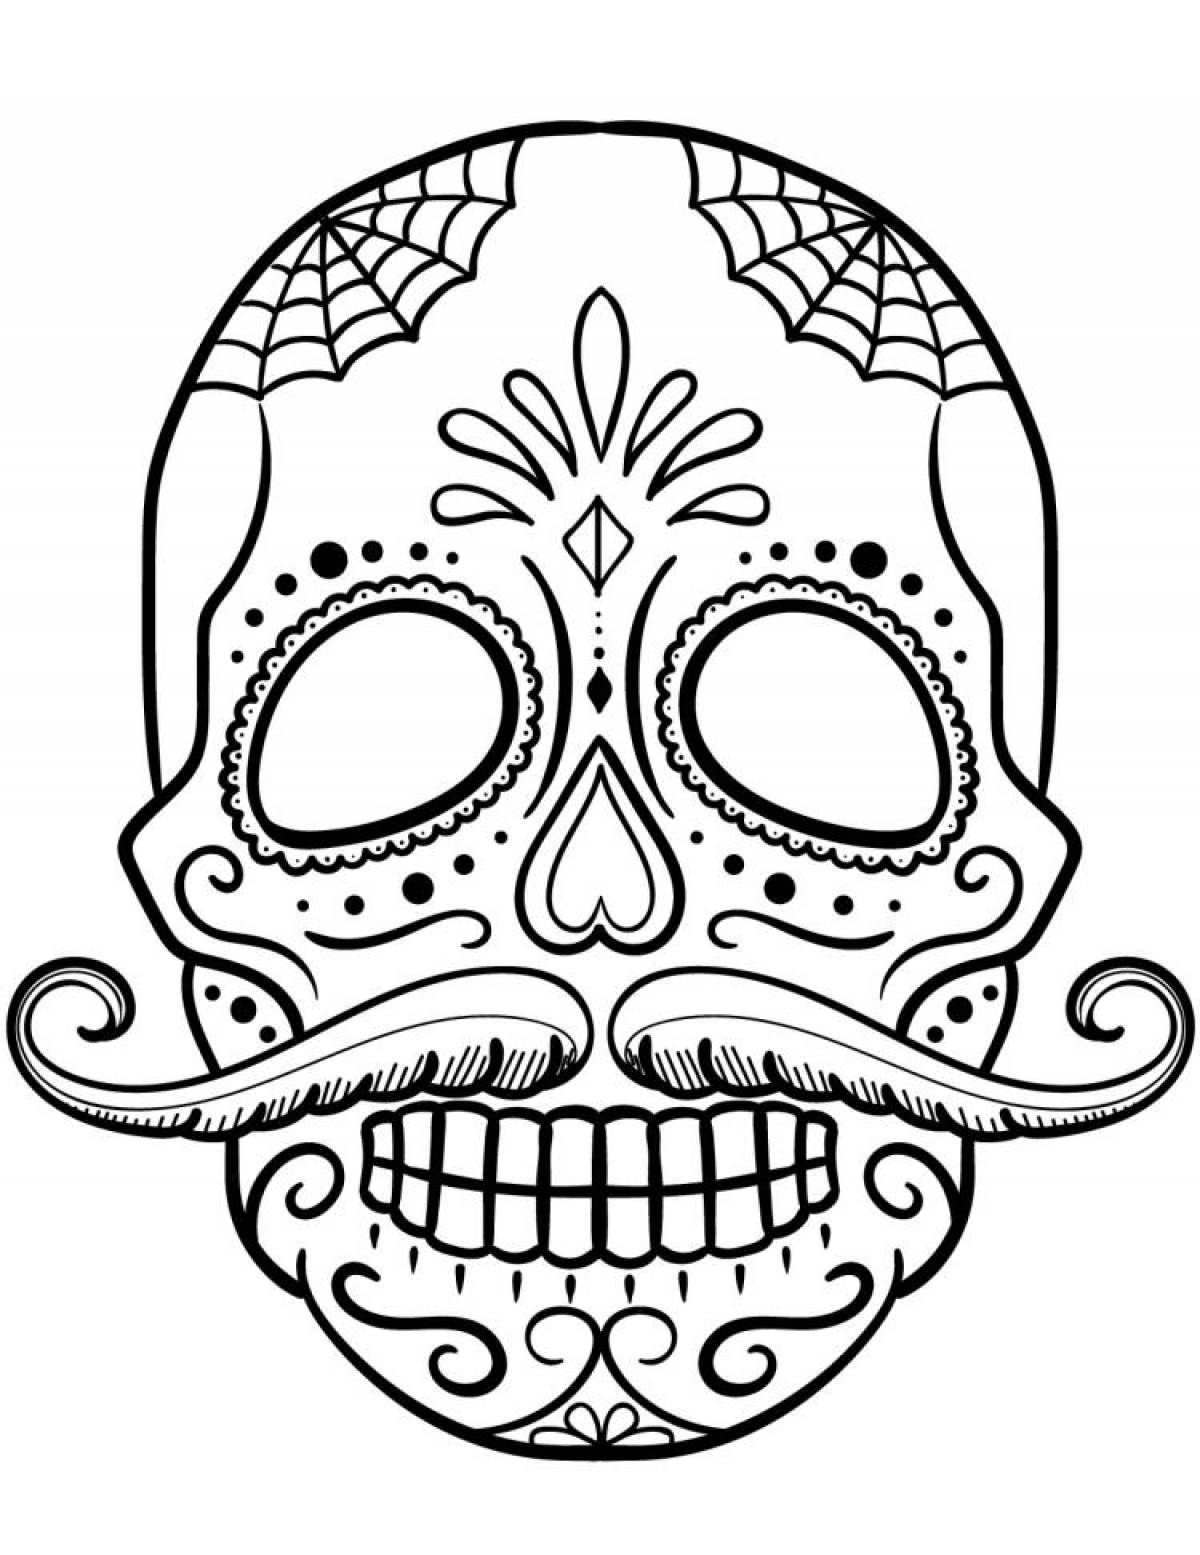 Intricate skull coloring